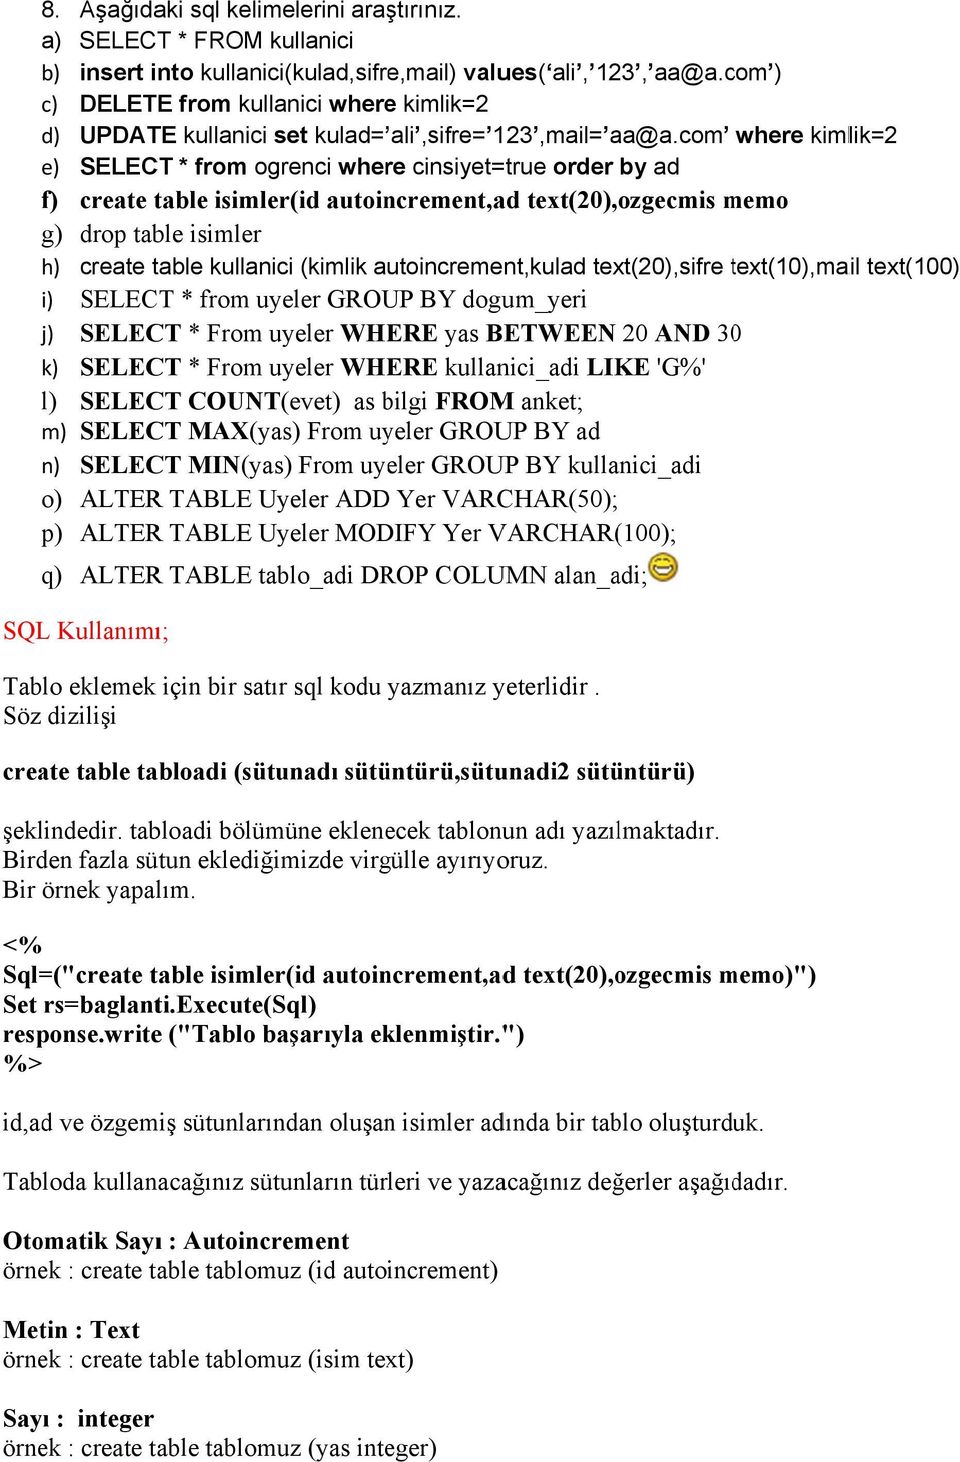 com where kimlik=2 e) SELECT * from ogrenci where cinsiyet= =true order by ad f) create table isimler(id autoincrement,ad text(20), ozgecmis memo g) drop table isimler h) create table kullanici